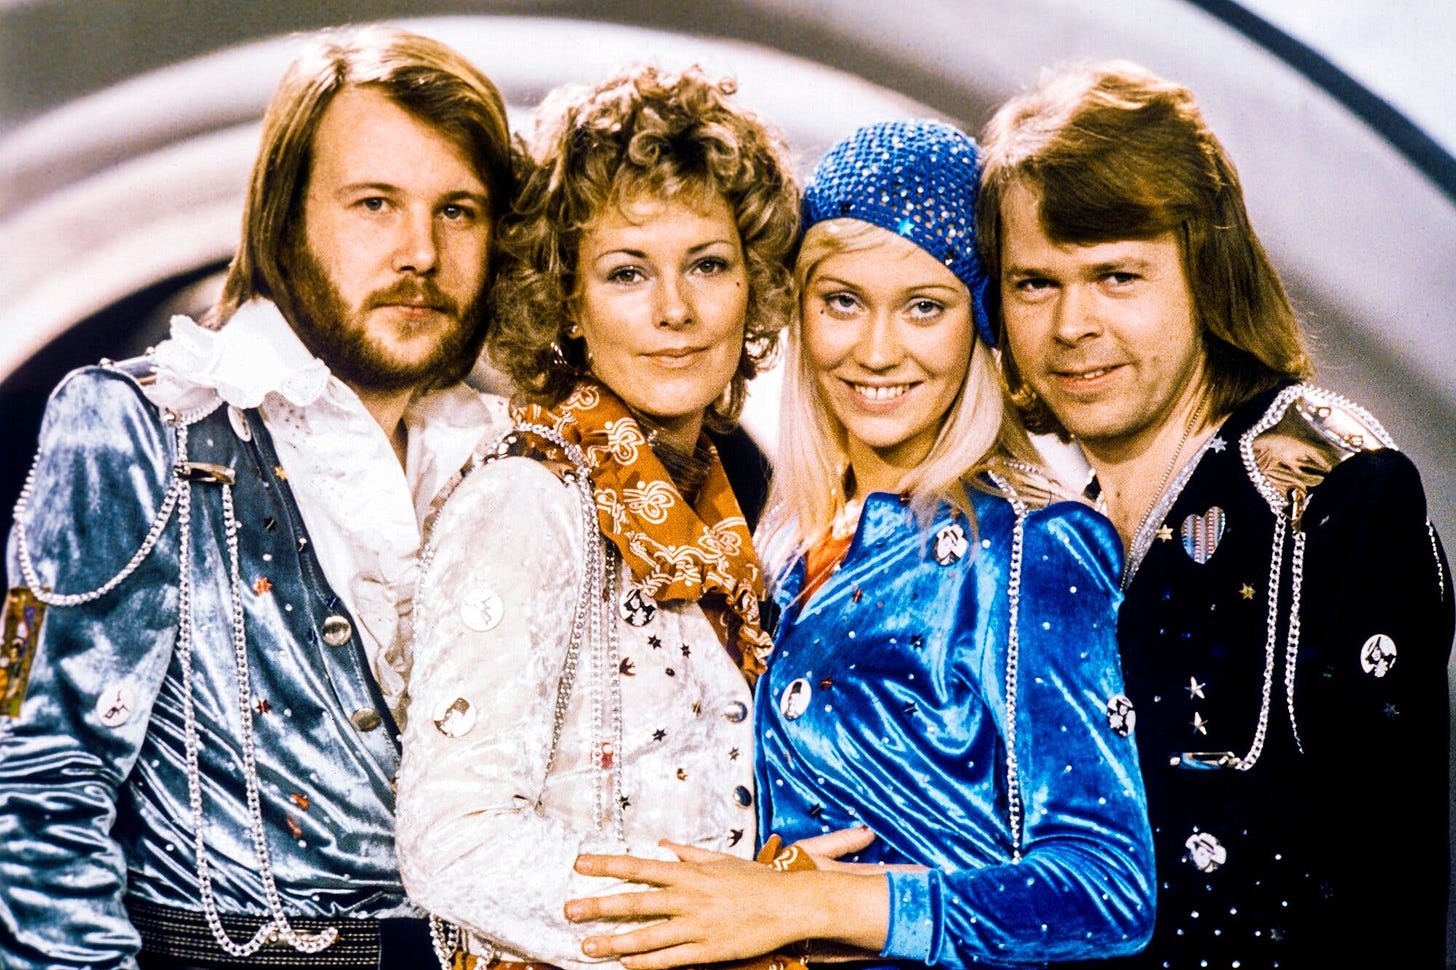 A Look at Abba's Best '70s Moments - Abba Photos Concert 1970s